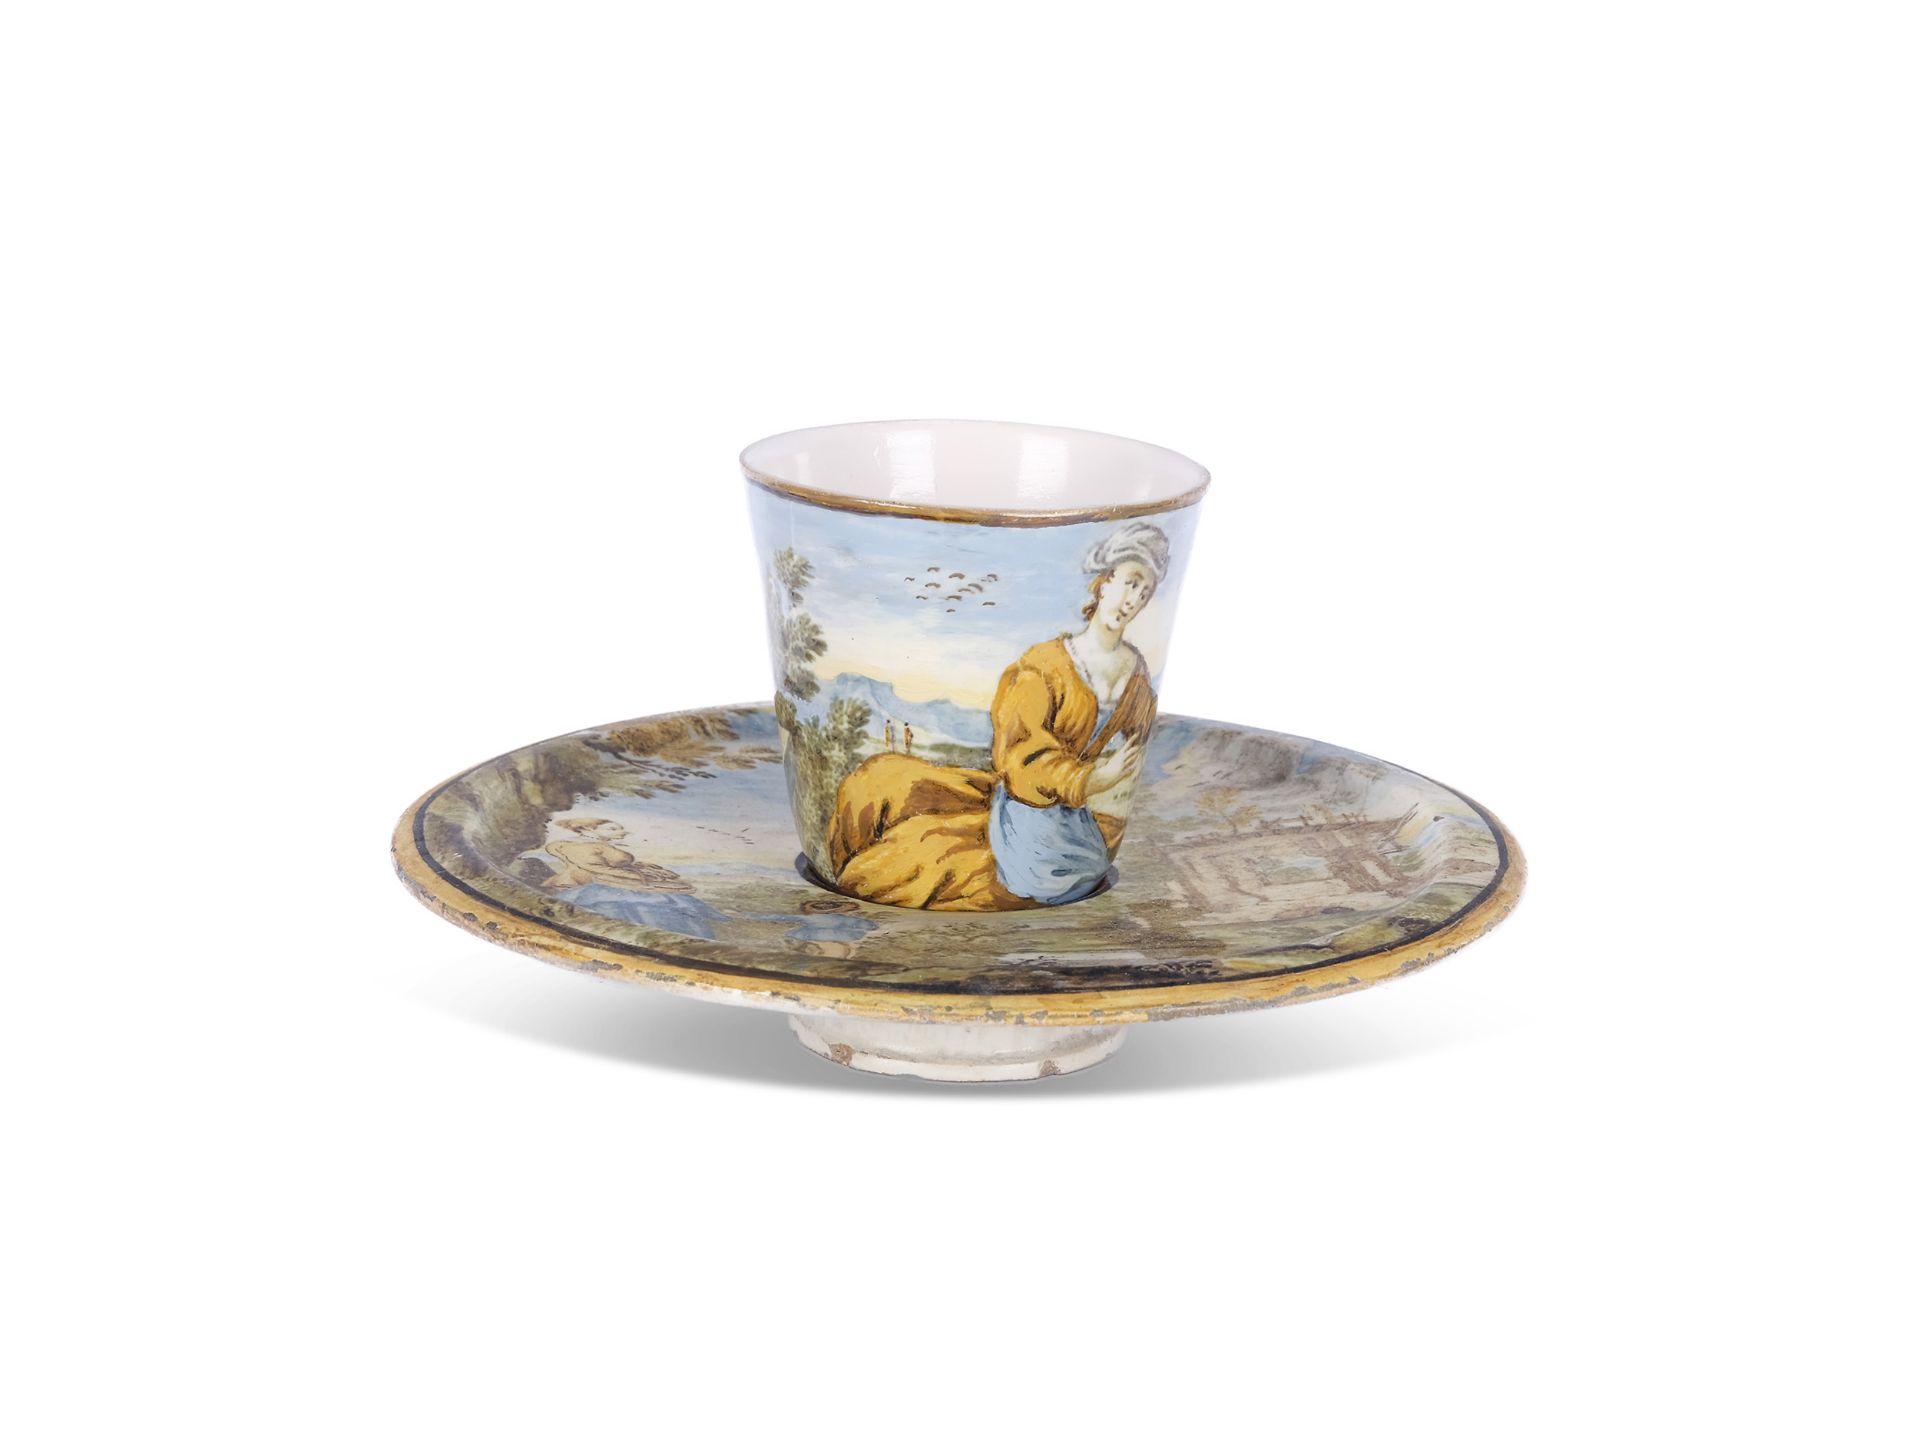 Cup and saucer, Castelli?, painted in the style of the Grue family, Italy, 18th century - Image 2 of 3